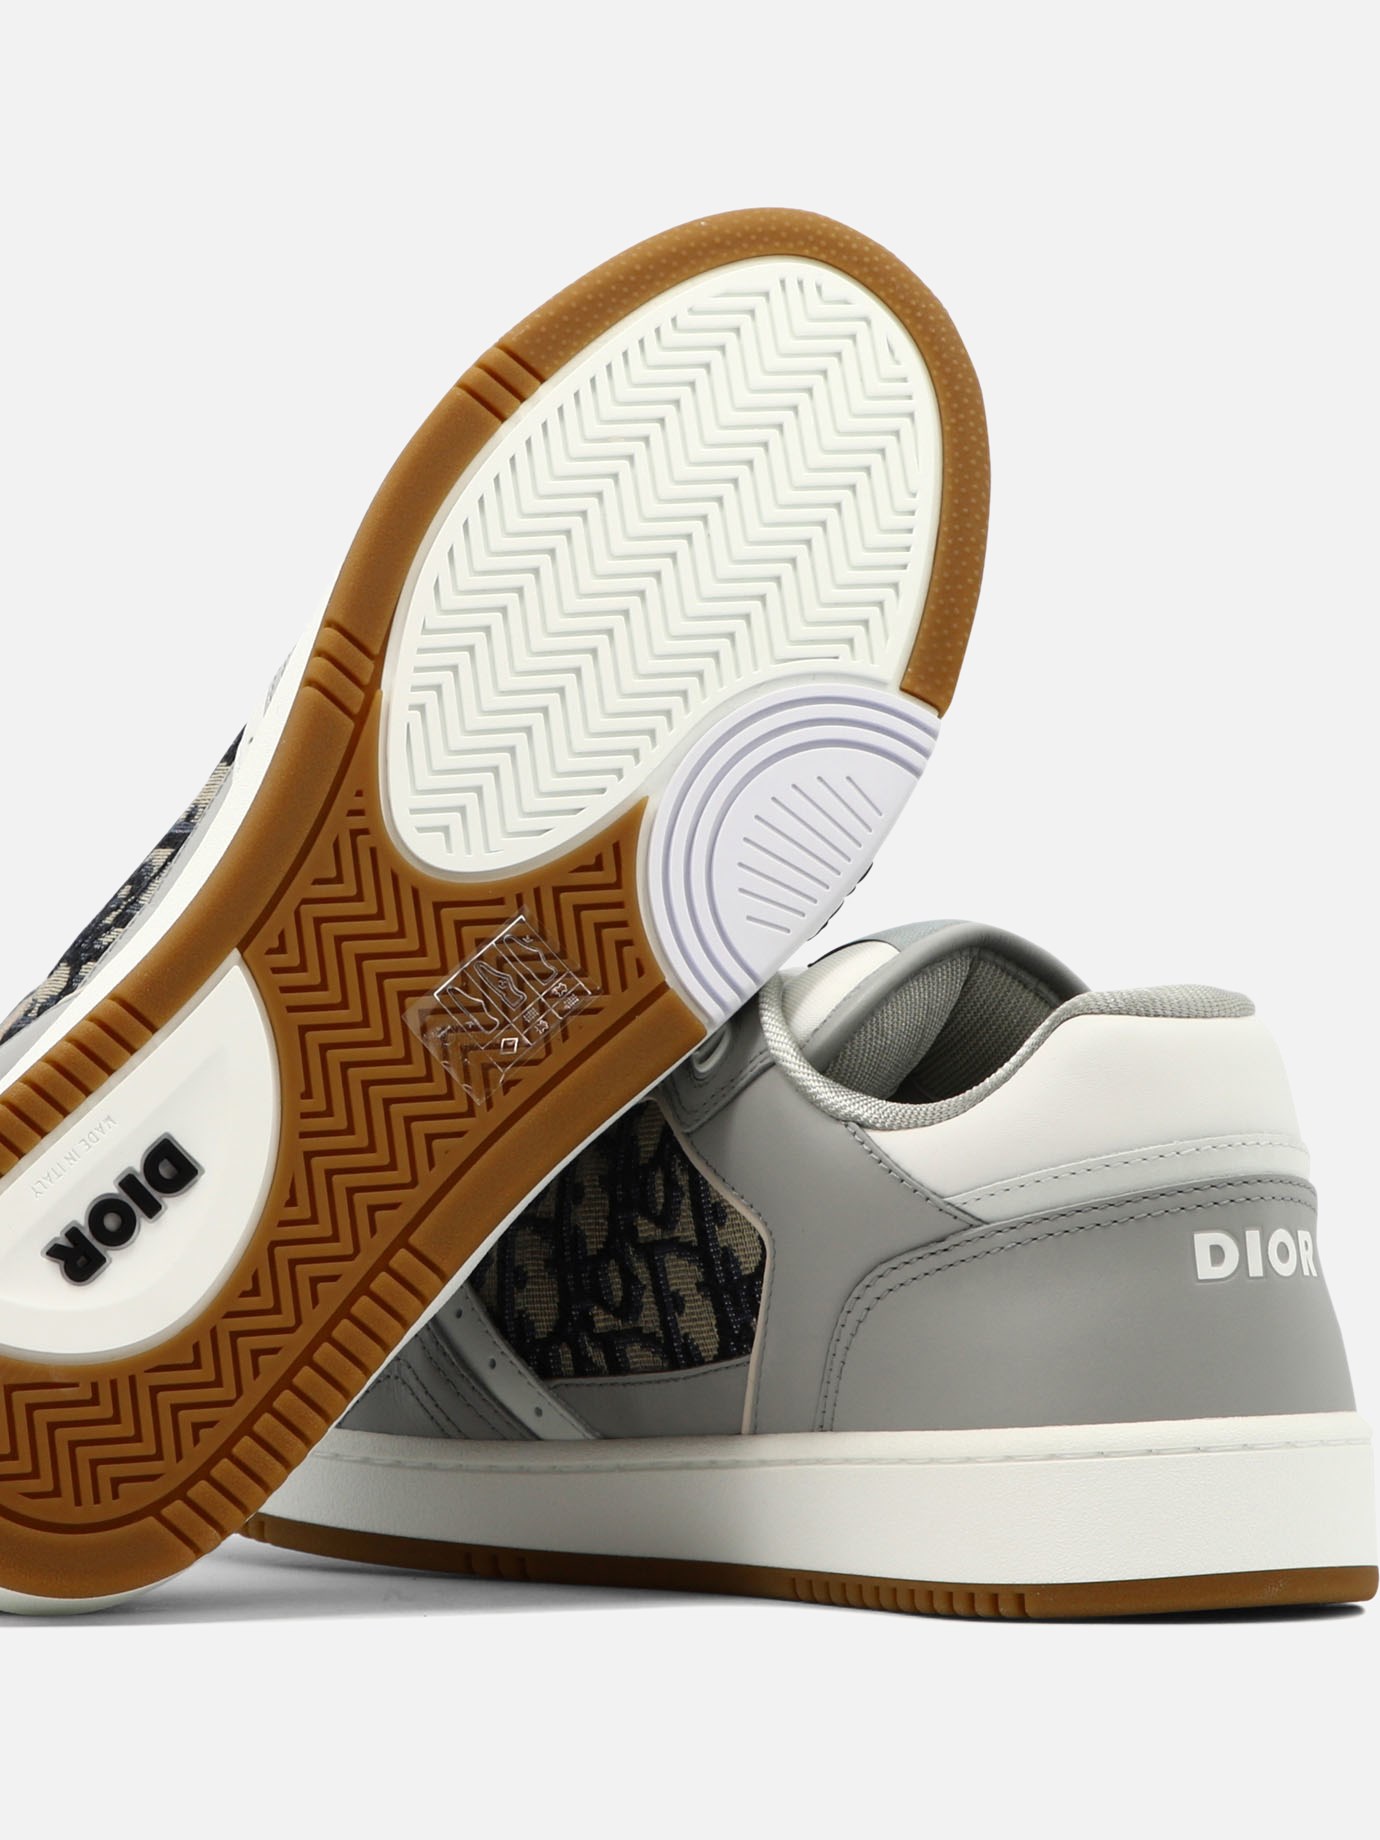  B27  sneakers by Dior